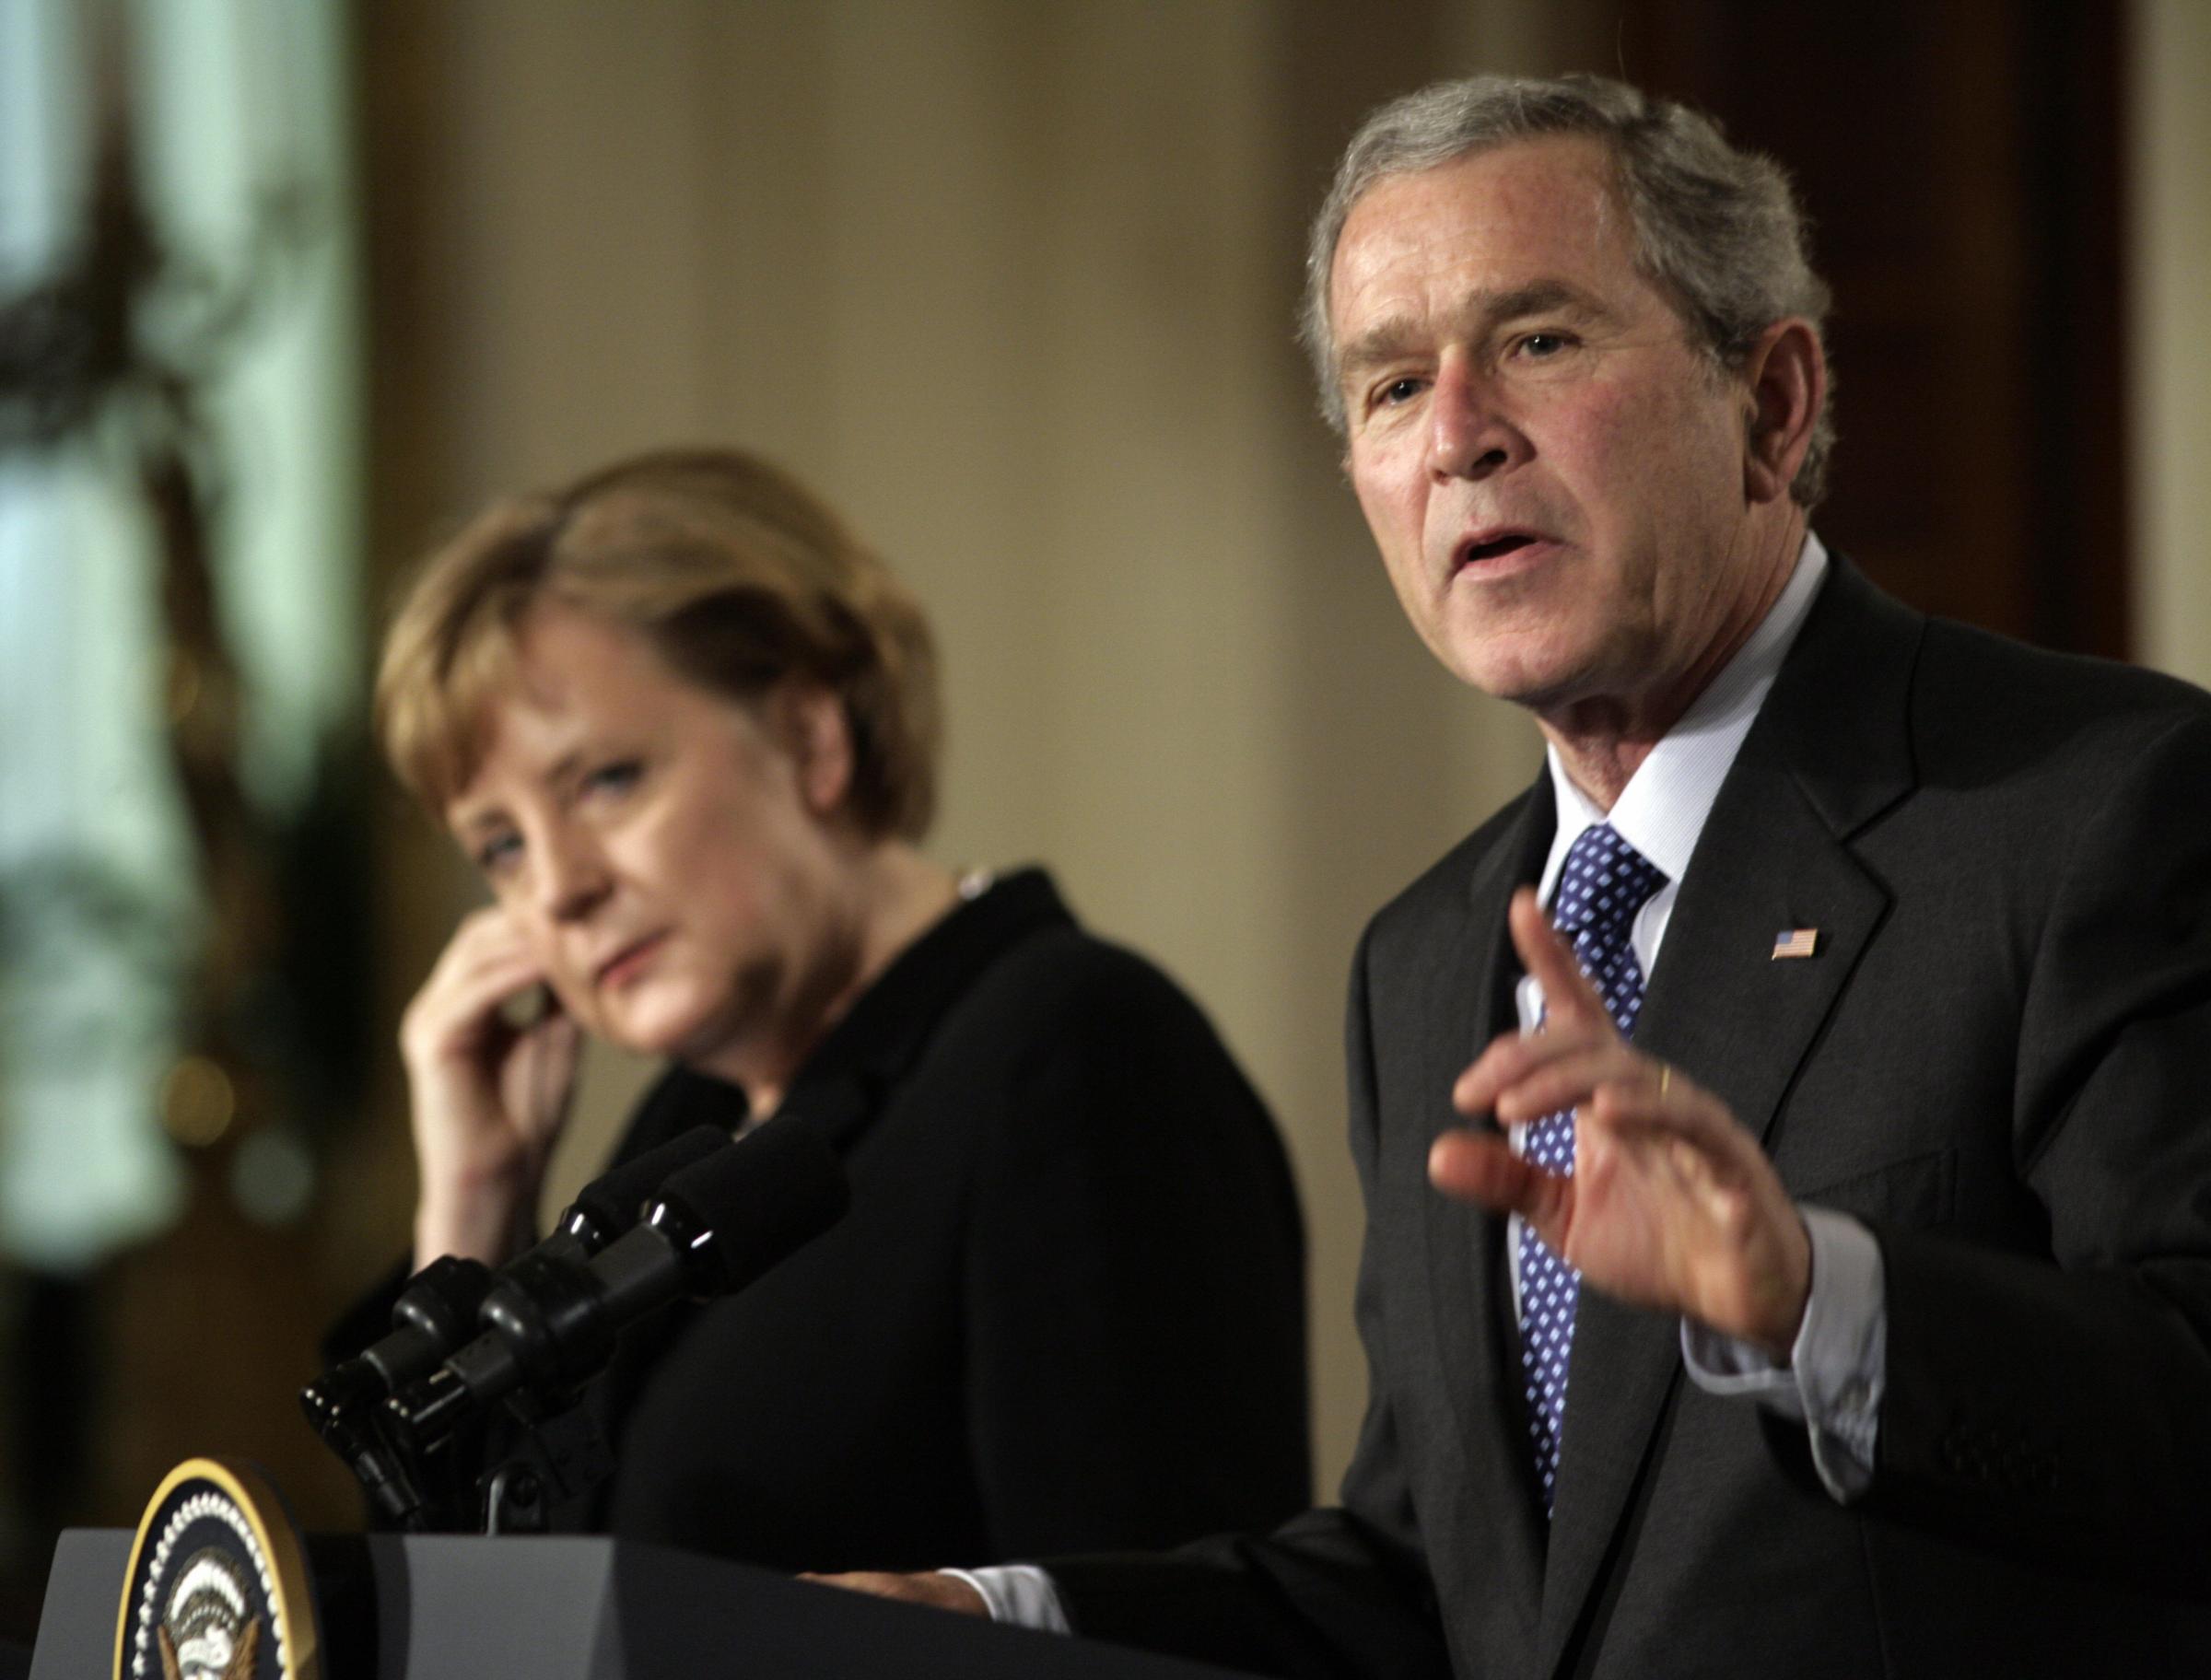 President George W. Bush speaks during a joint press conference with German Chancellor Angela Merkel on Jan. 13, 2006 in the East Room of the White House in Washington D.C.